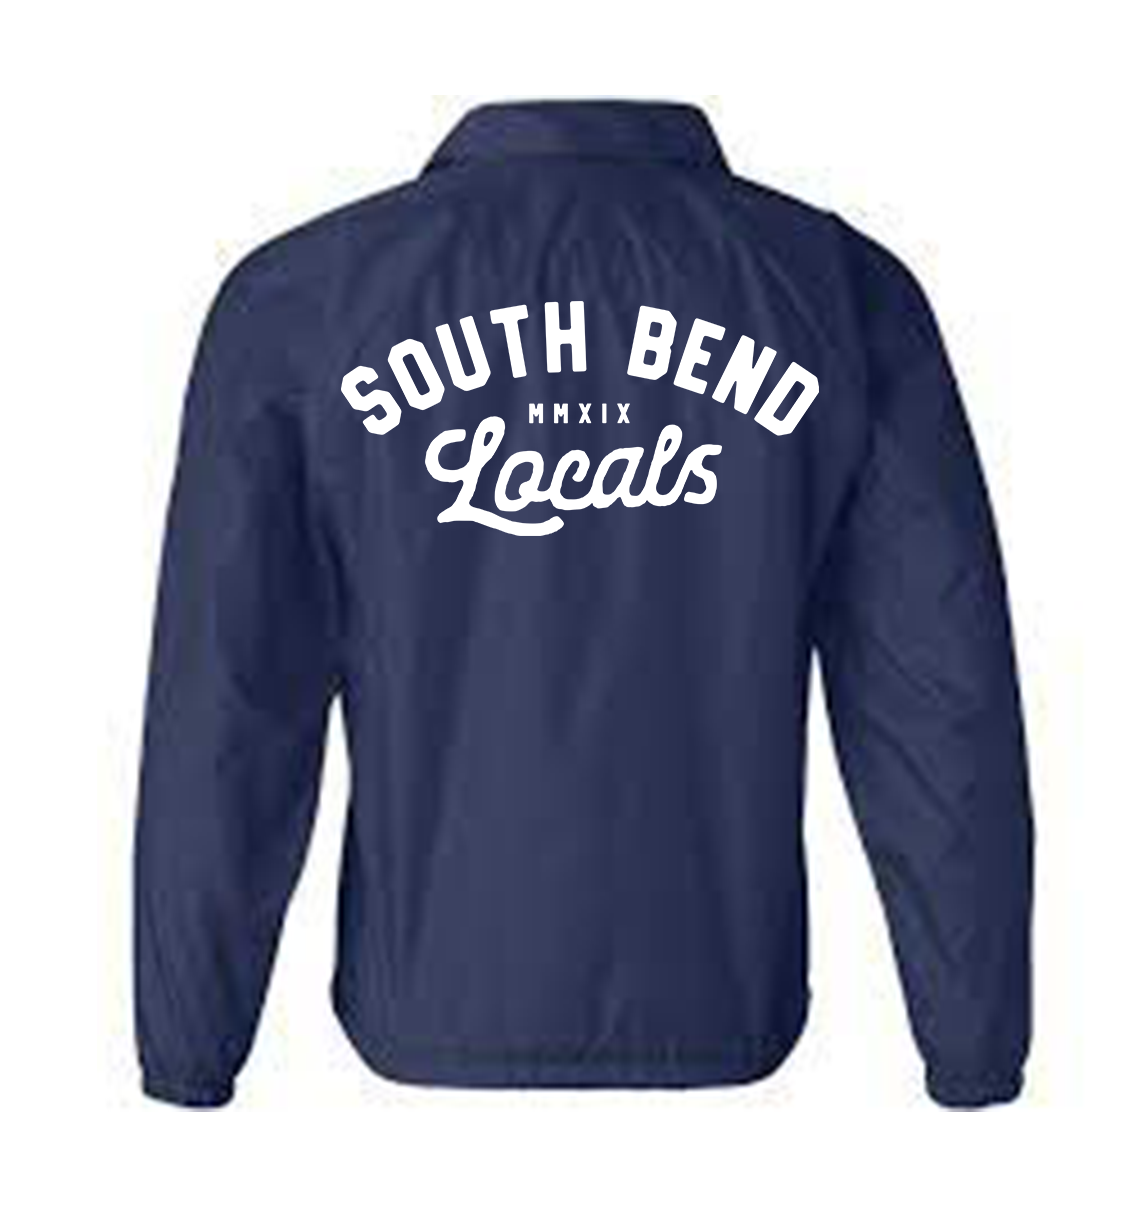 SB Coaches Jacket | South Bend Locals